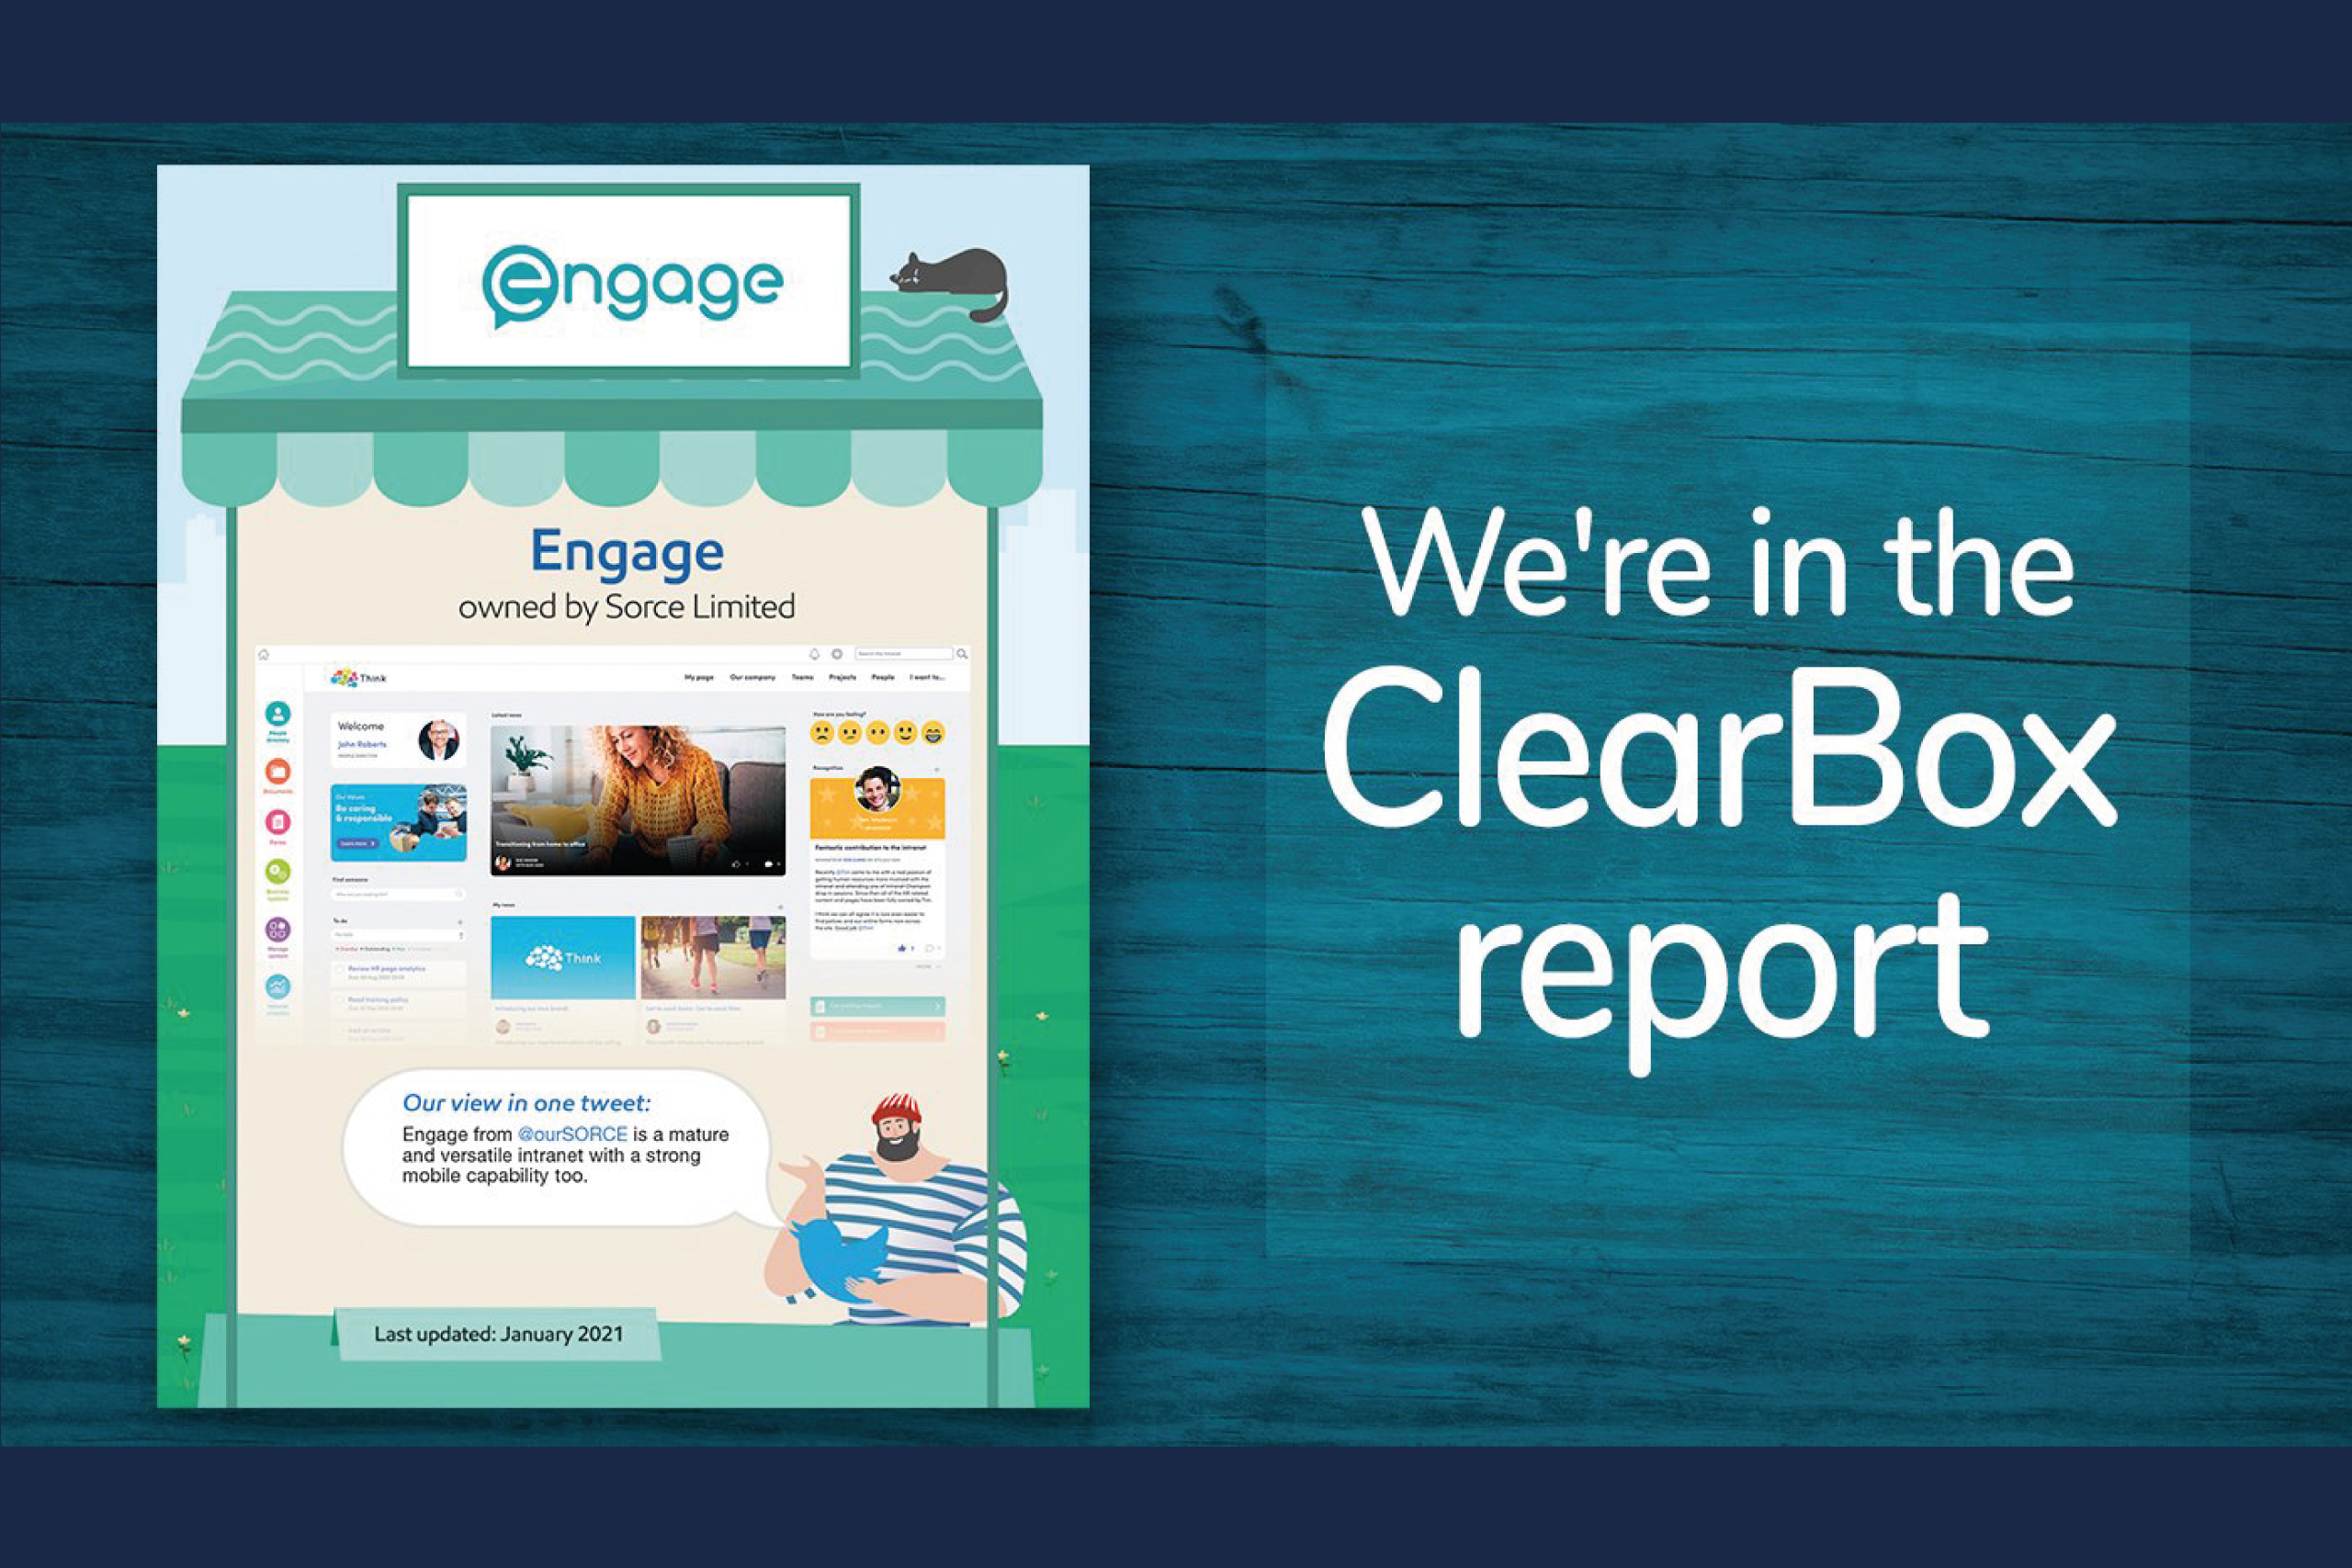 Engage intranet software is in the latest ClearBox report